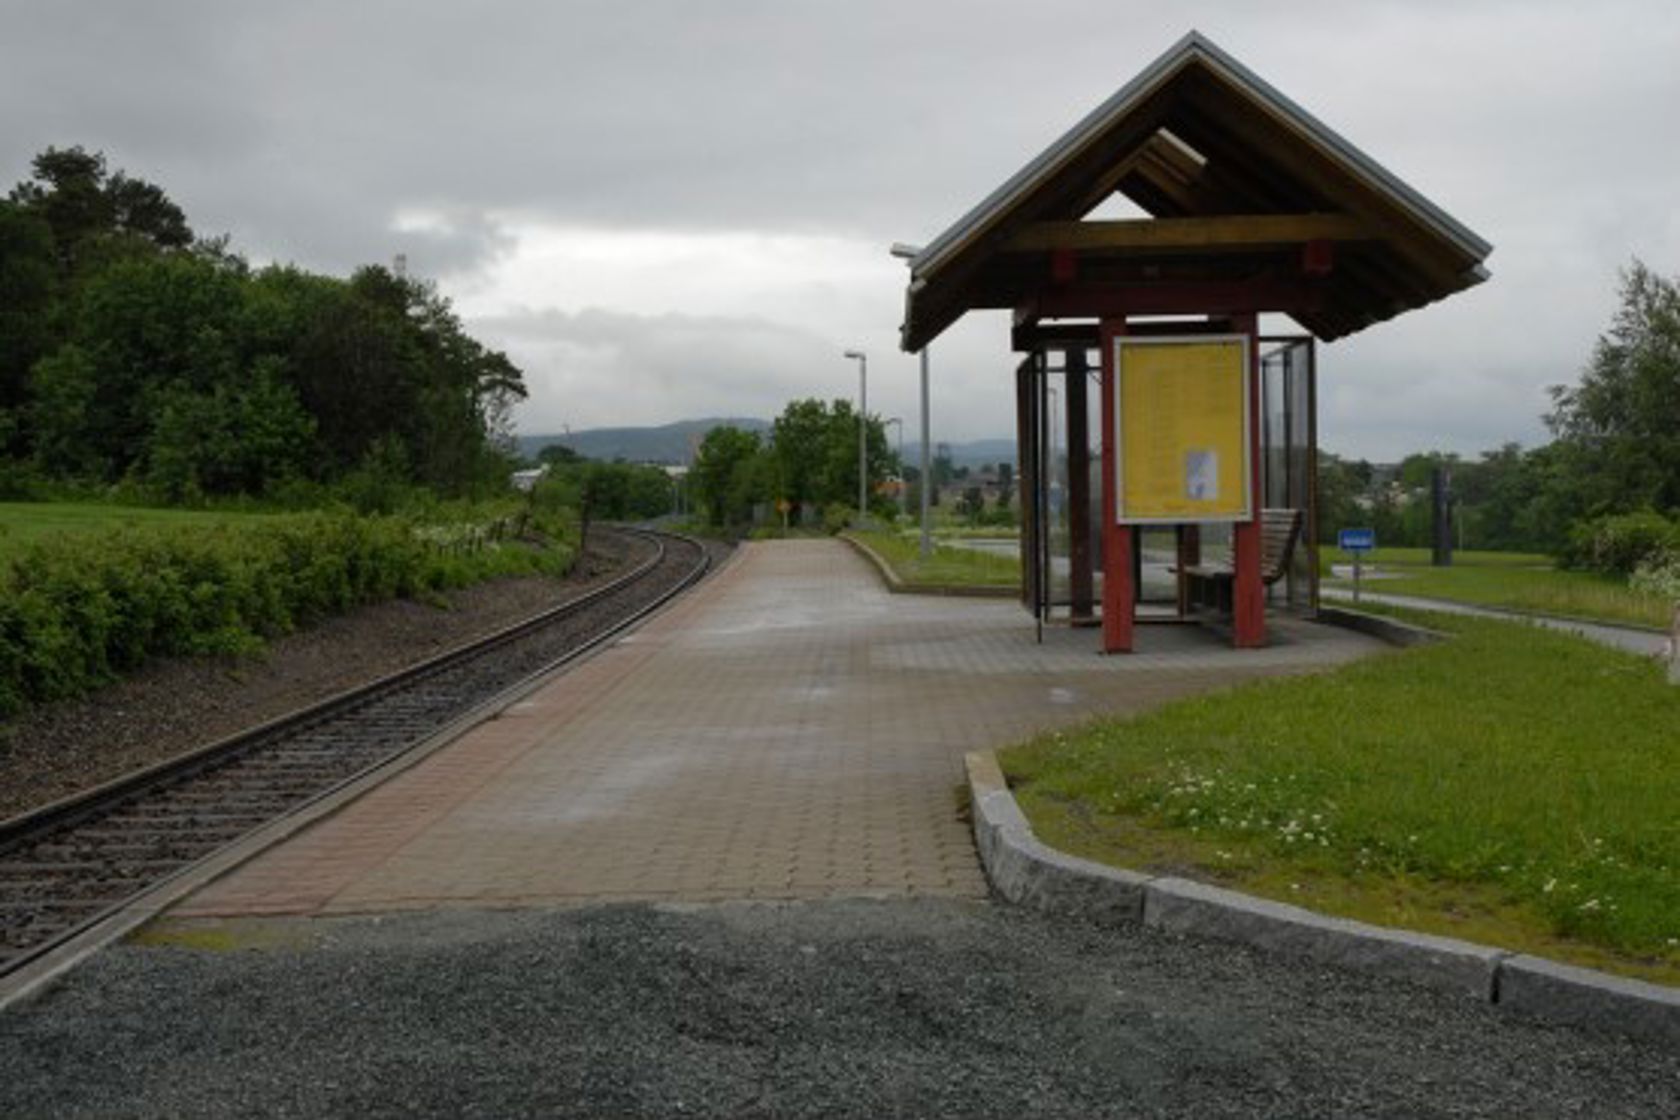 Exterior view of Rotvoll stop